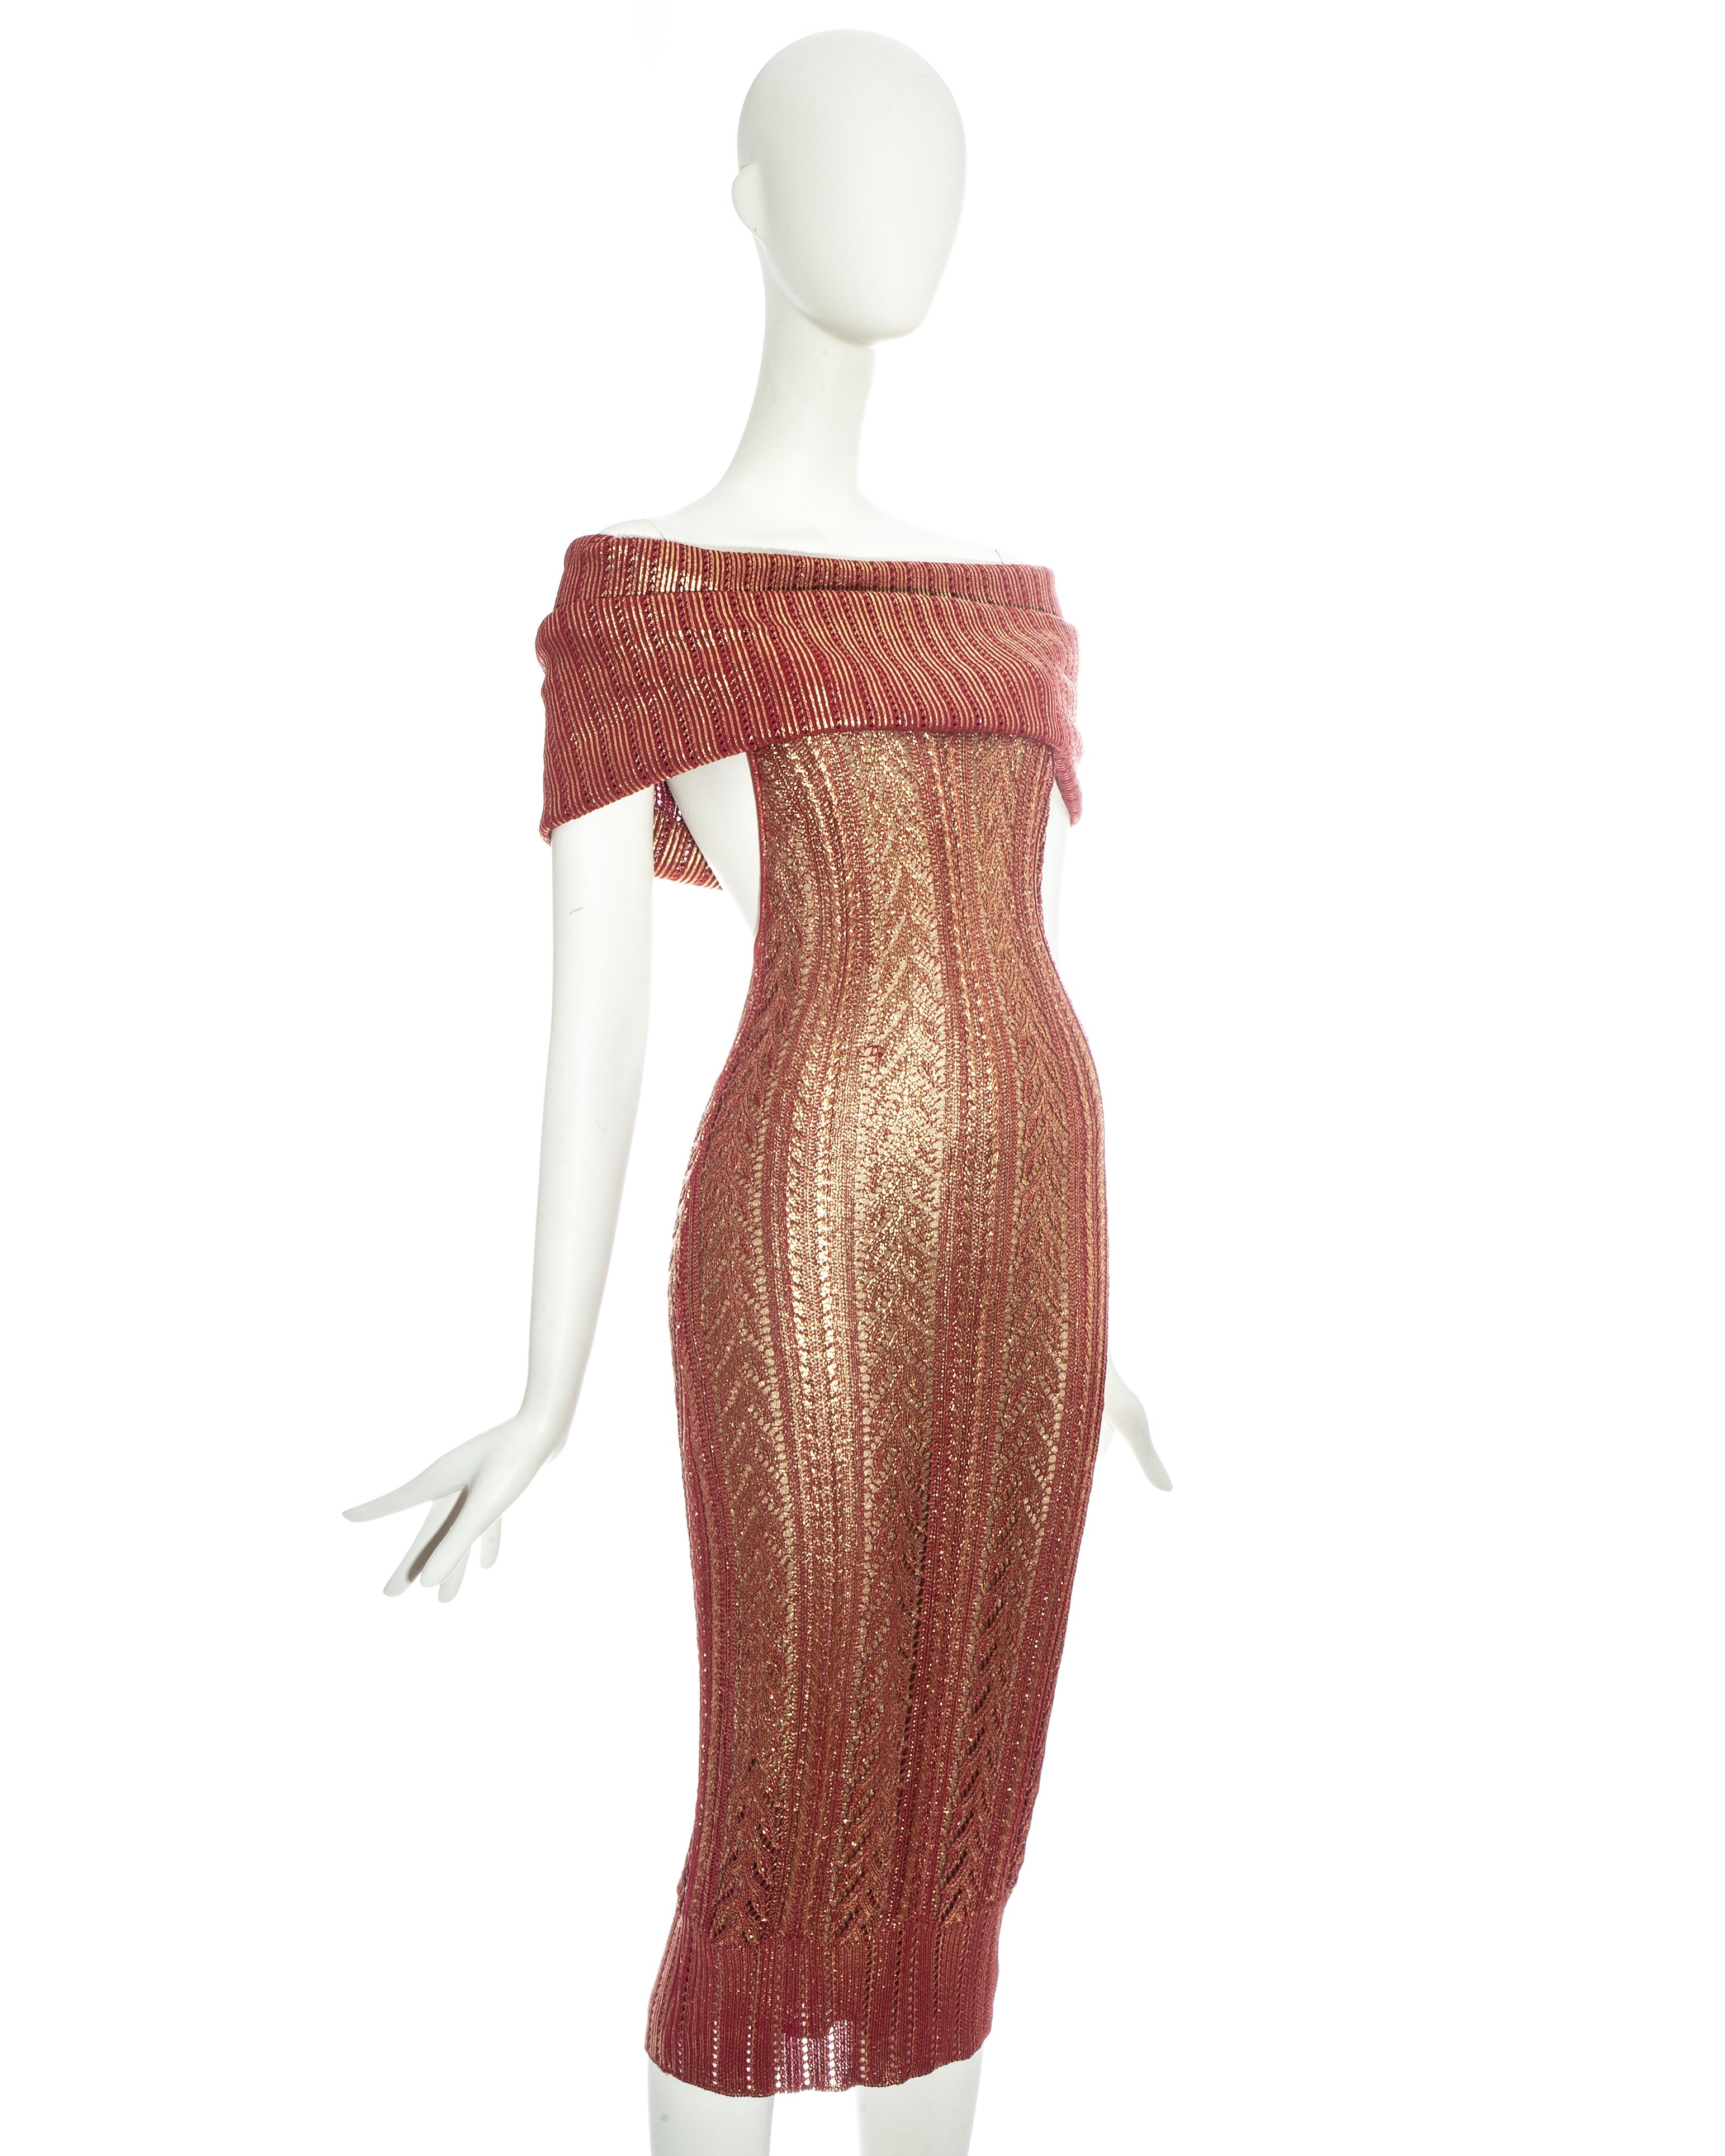 Christian Dior by John Galliano metallic copper knitted figure hugging evening dress with extra long turn over collar sitting off the shoulder

Fall-Winter 1999